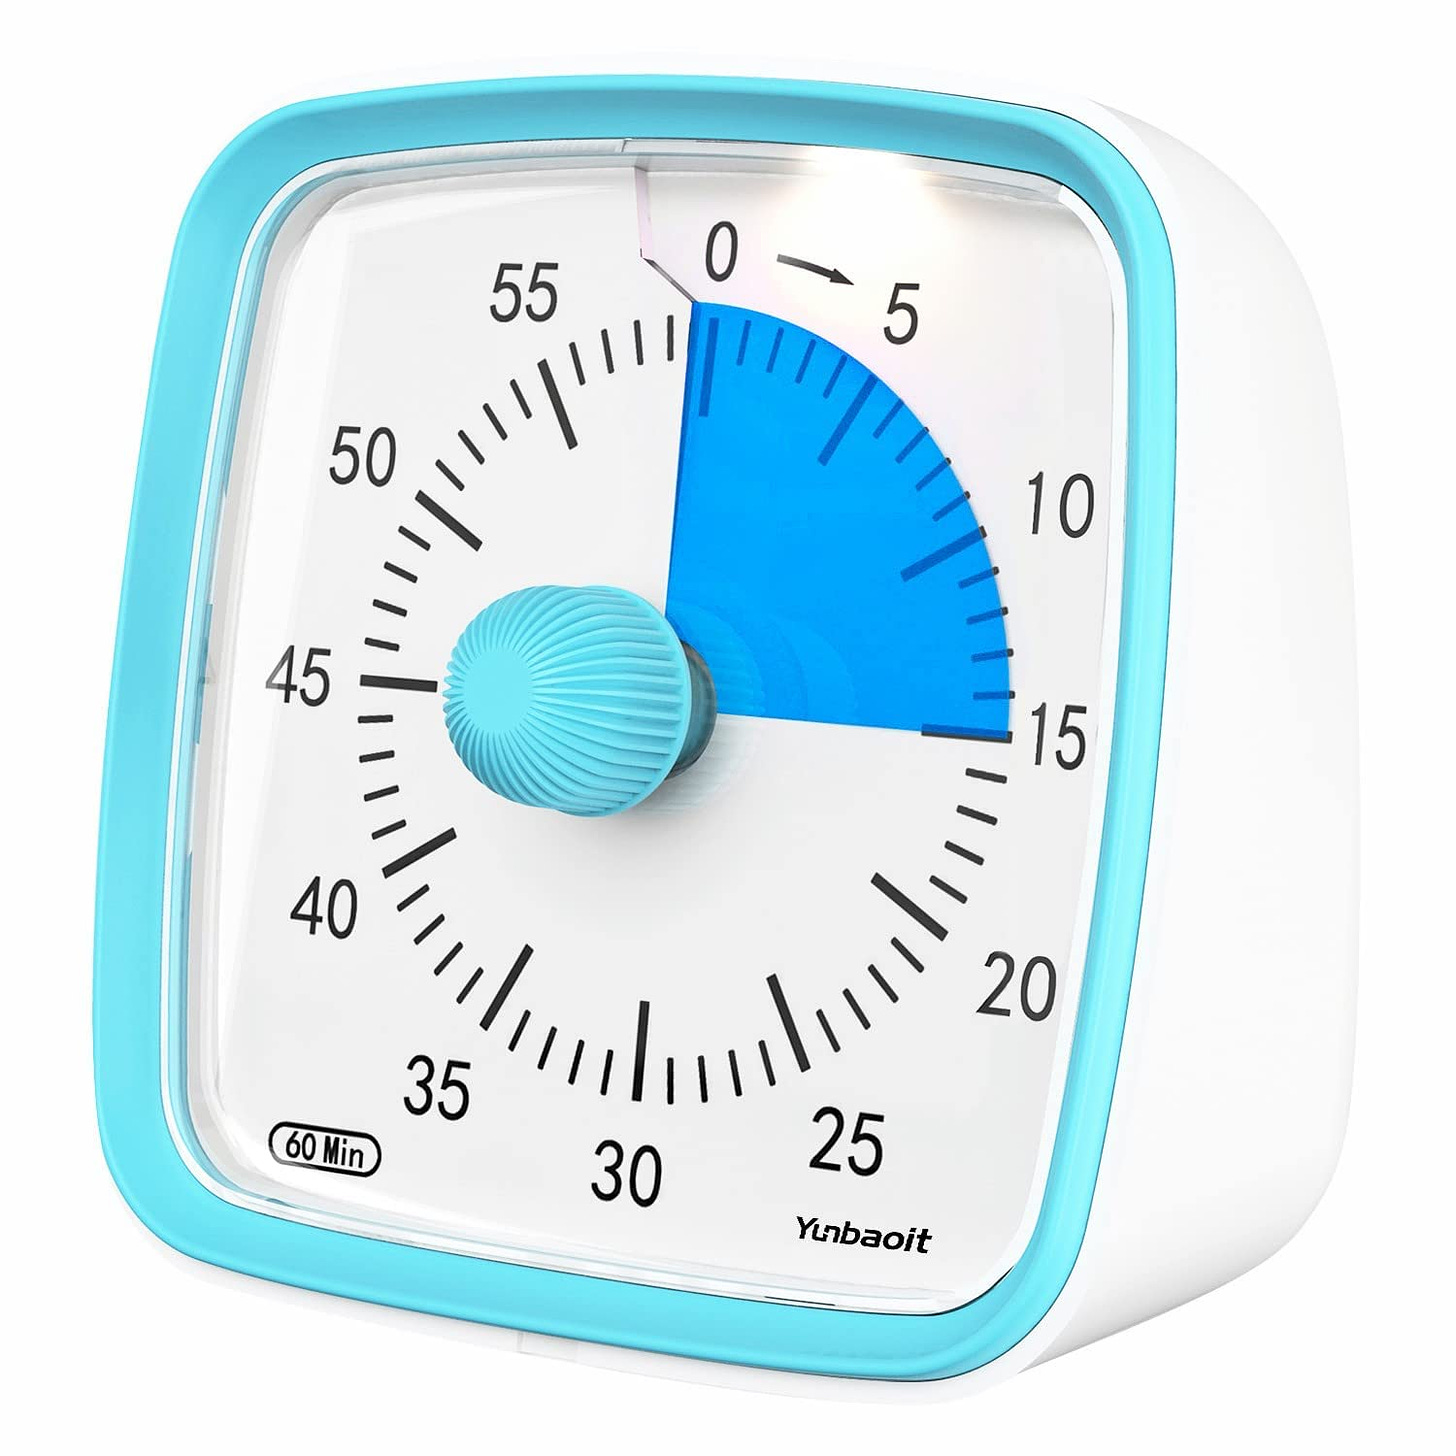 Image: A favorite visual timer. I’ve ordered several of these for our school